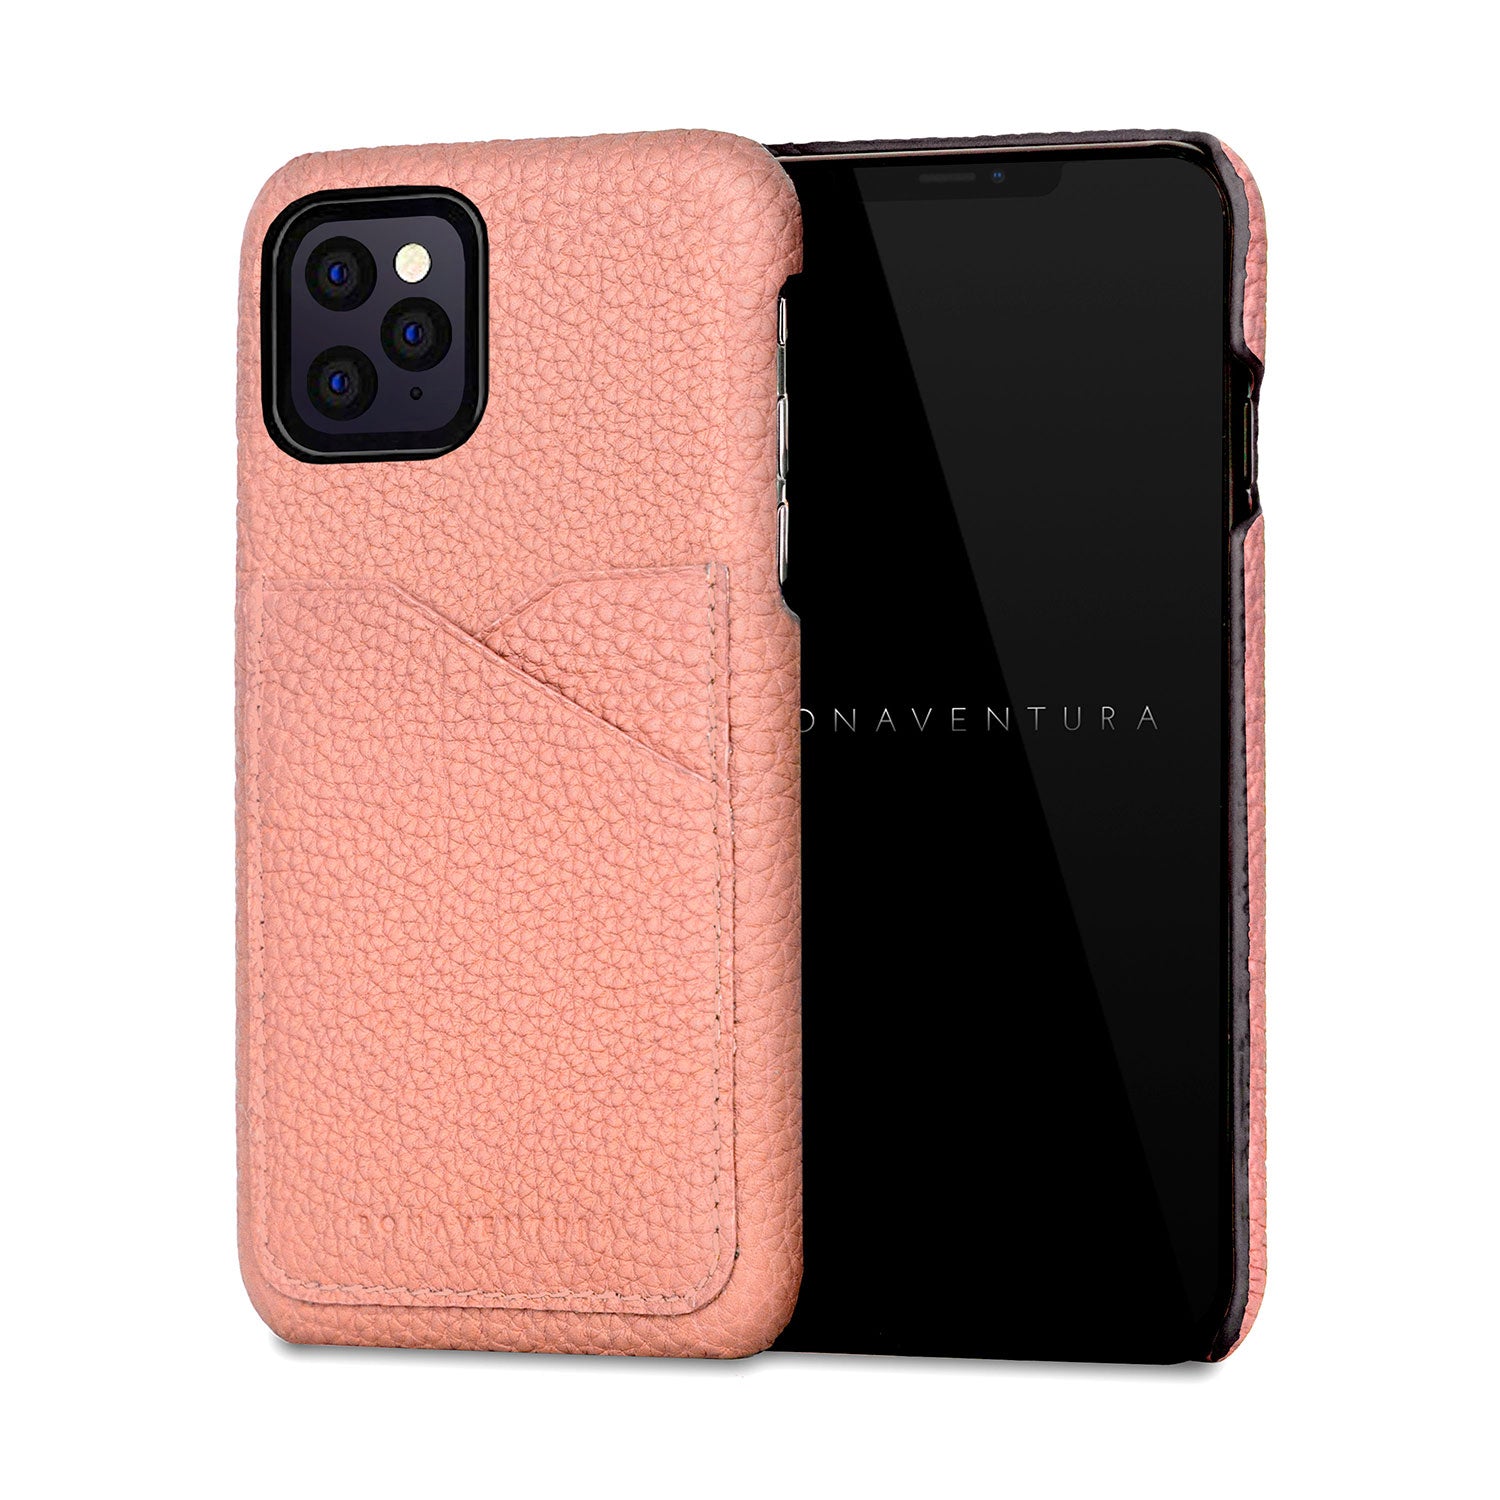 (iPhone 11 Pro) Back cover case Shrink leather